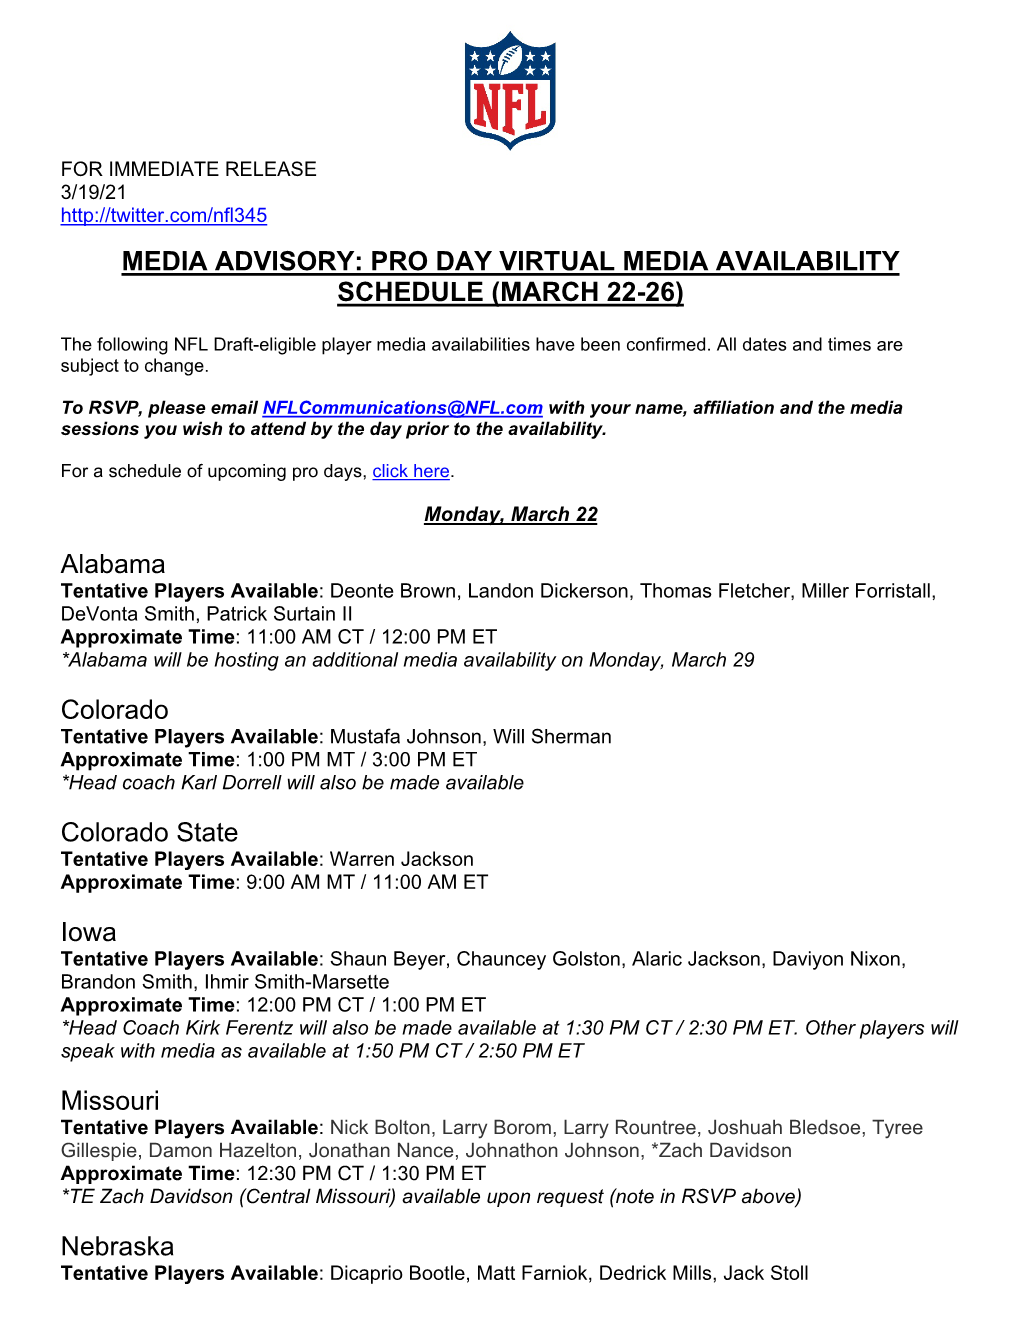 Pro Day Virtual Media Availability Schedule (March 22-26)